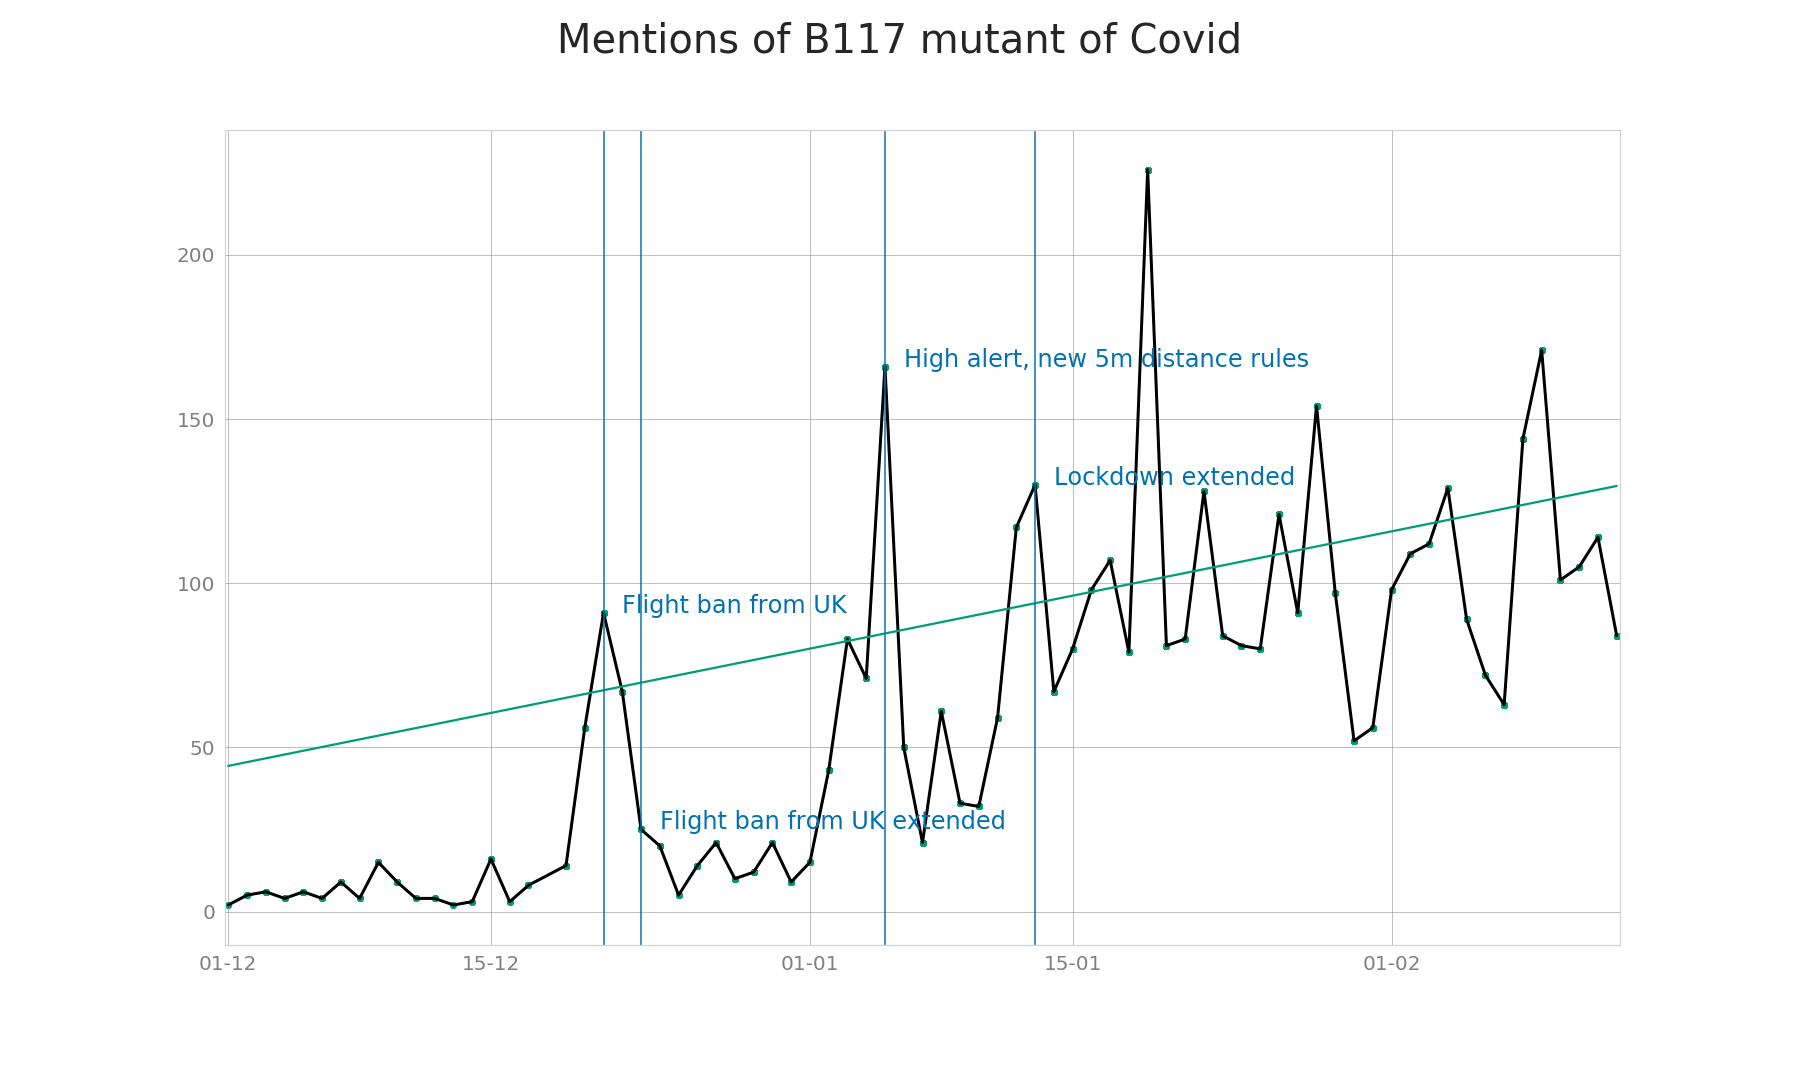 Time series of mentions